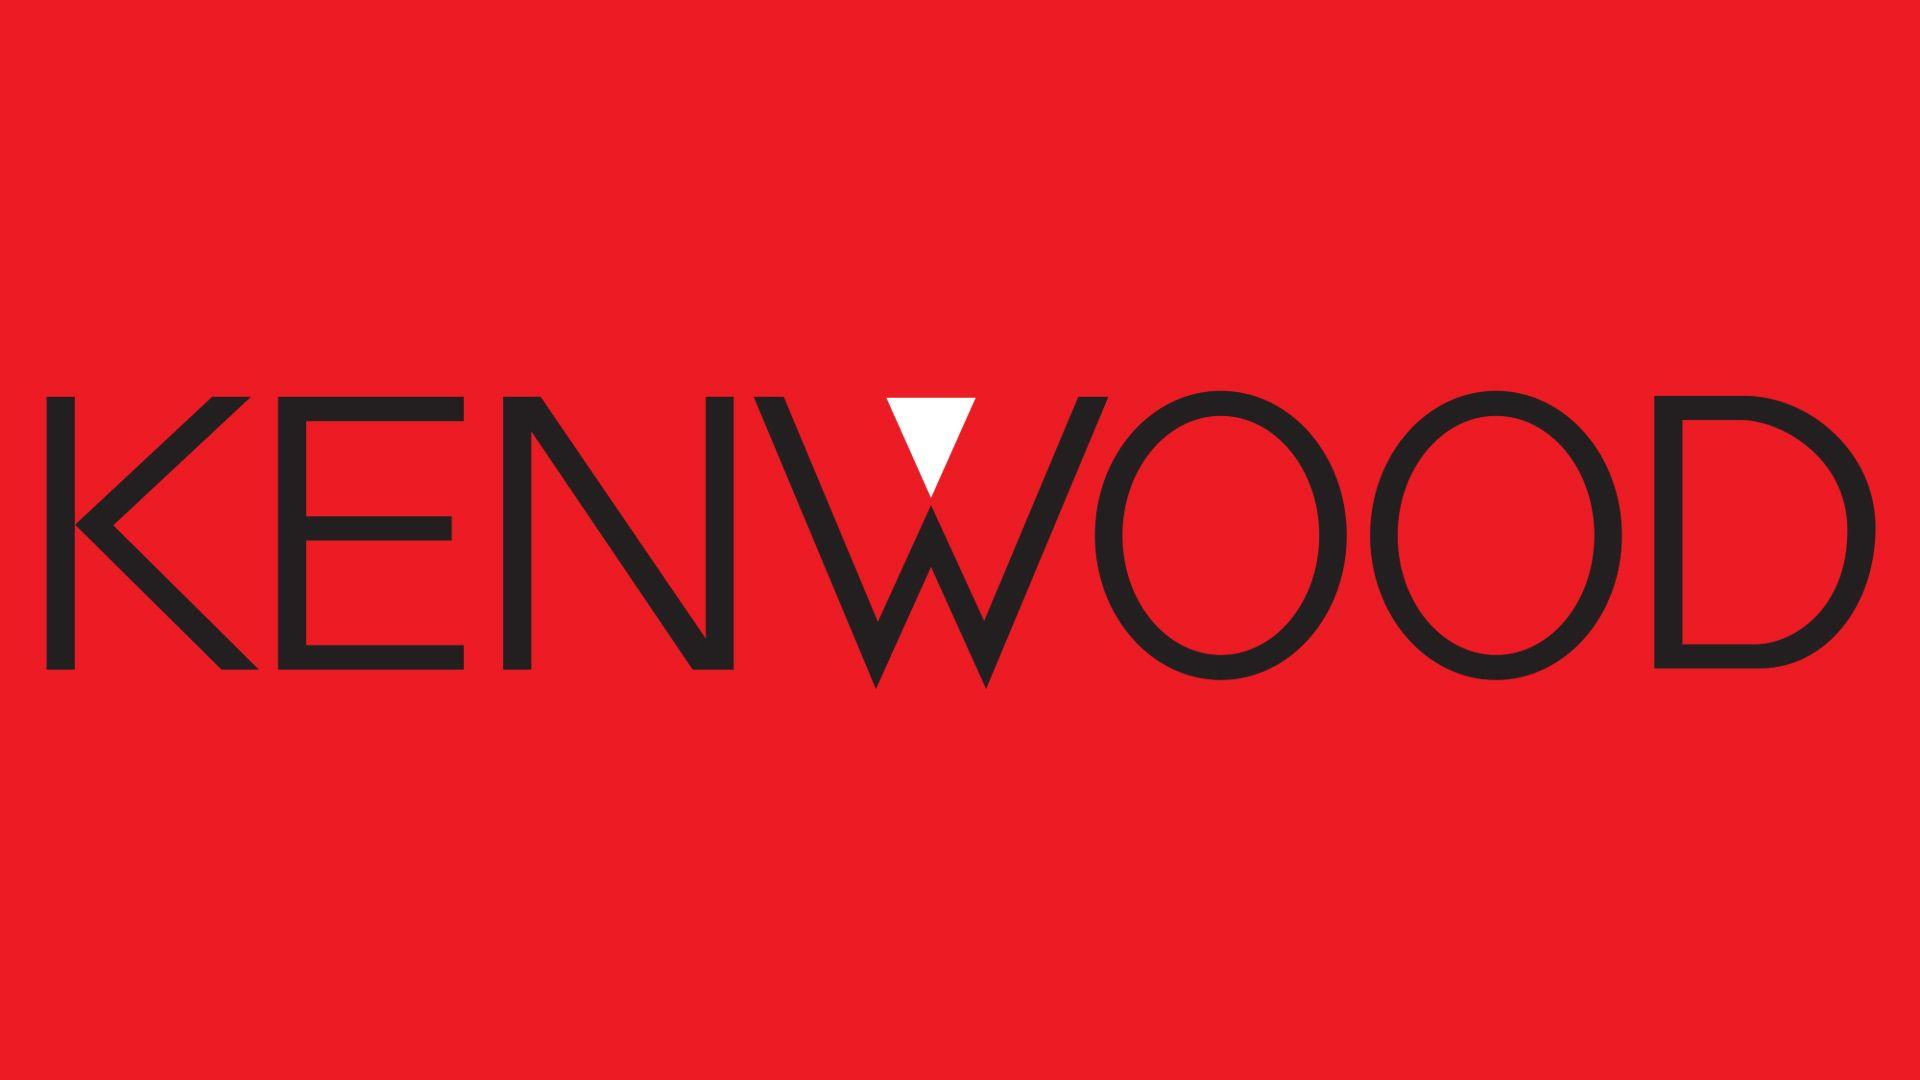 Red Triangle White Triangle above Logo - Kenwood Logo, Kenwood Symbol, Meaning, History and Evolution